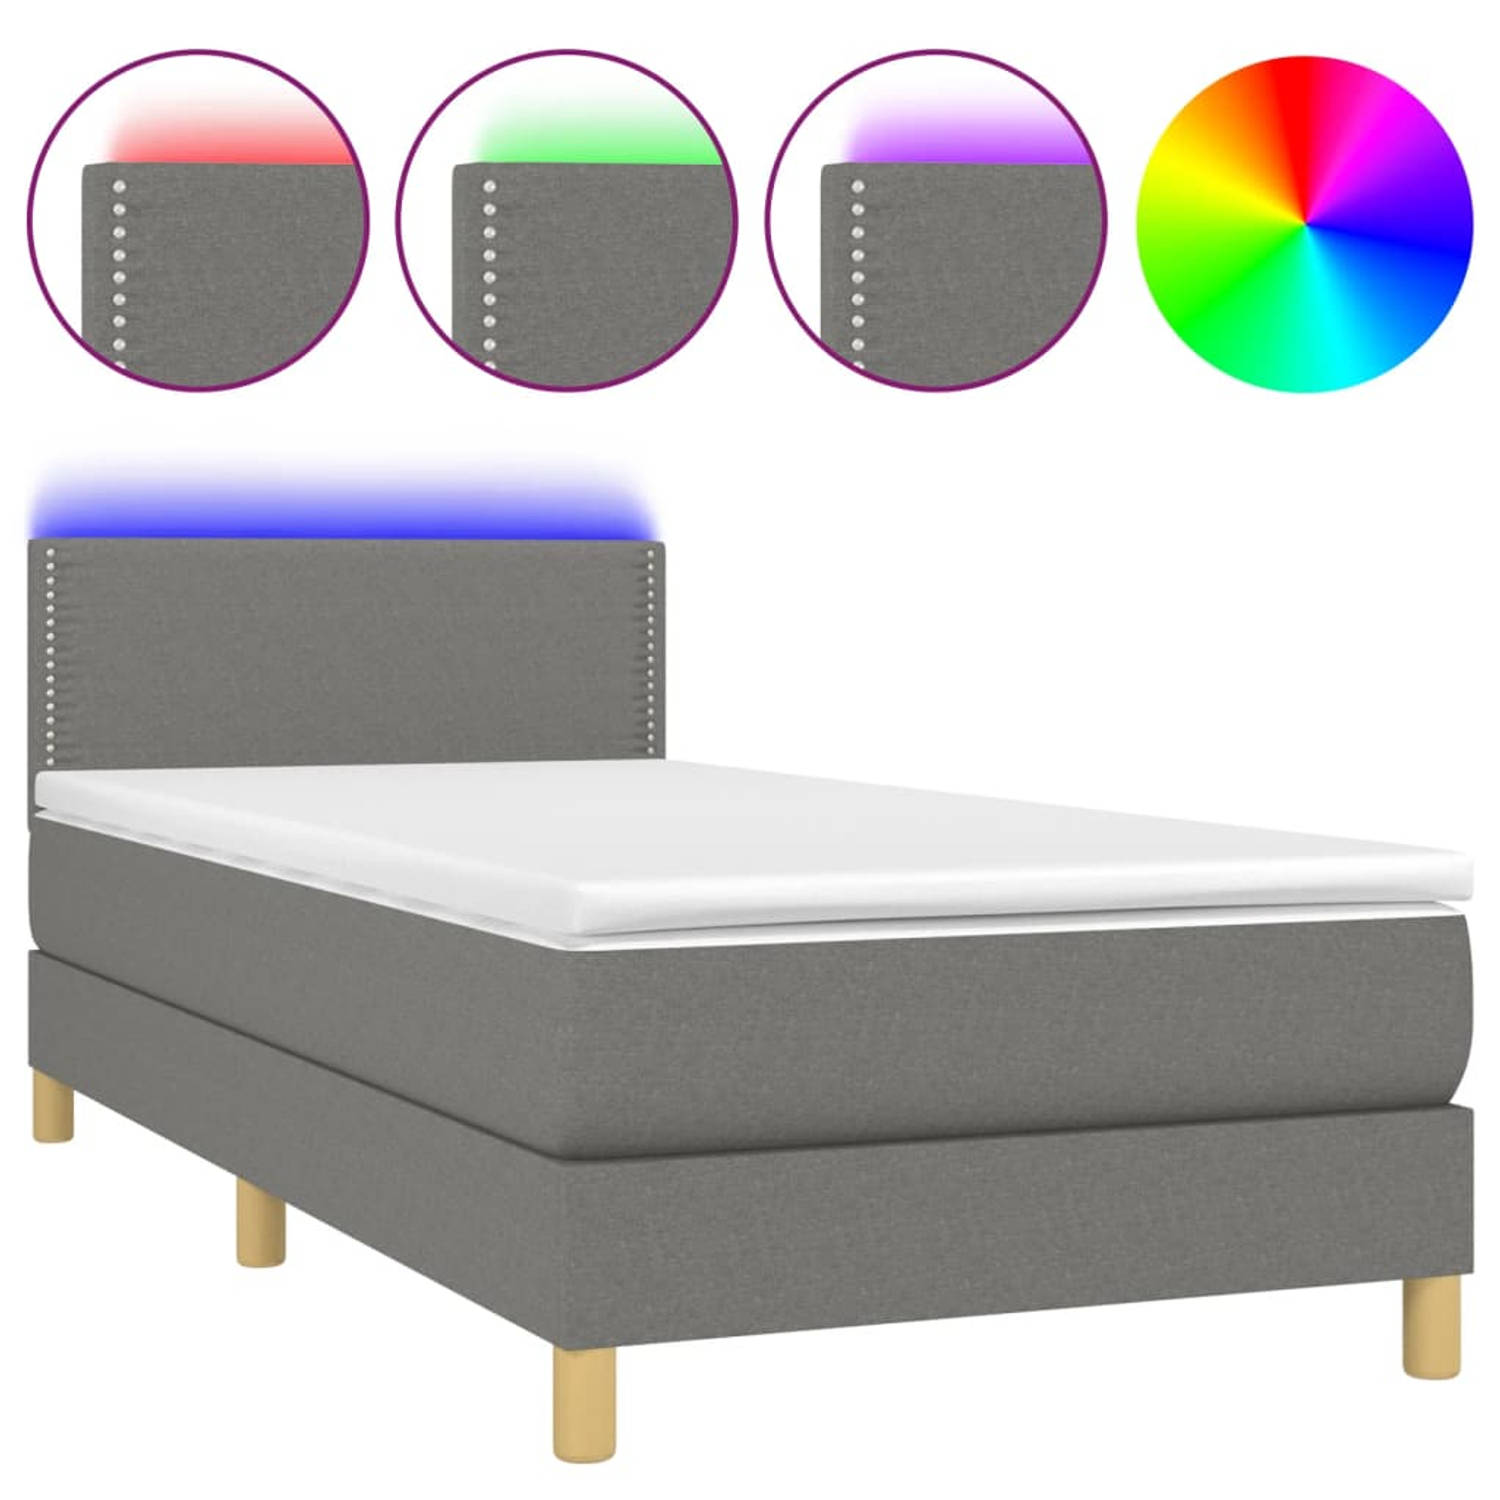 The Living Store Boxspring met matras en LED stof donkergrijs 90x190 cm - Boxspring - Boxsprings - Bed - Slaapmeubel - Boxspringbed - Boxspring Bed - Tweepersoonsbed - Bed Met Matr